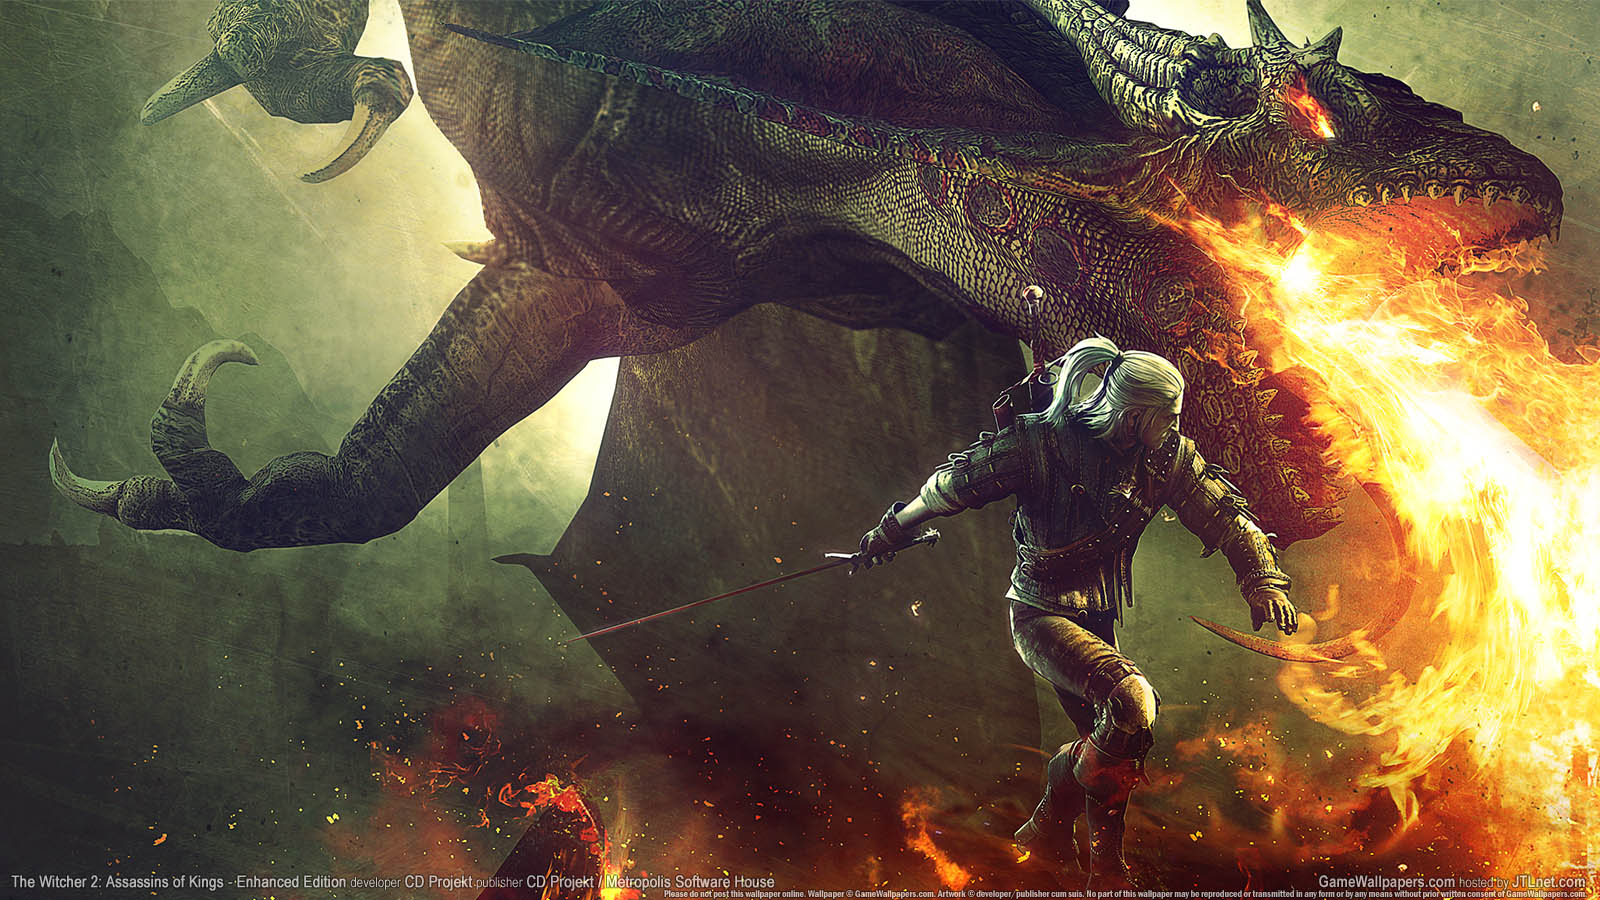 The Witcher 2: Assassins of Kings - Enhanced Edition achtergrond 01 1600x900